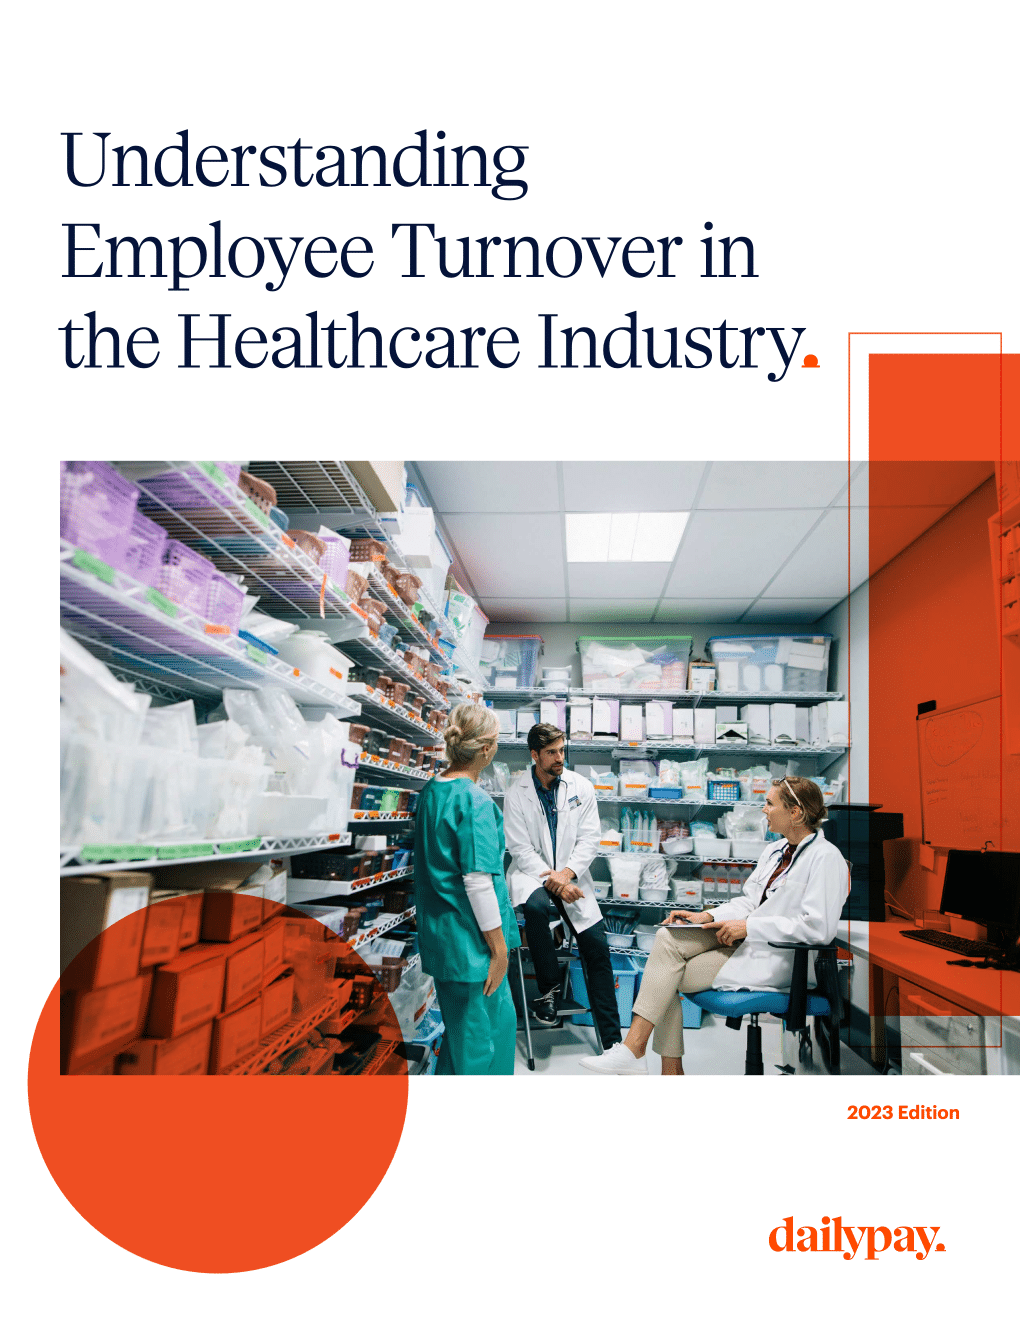 Cover of a report titled "Understanding Employee Turnover in the Healthcare Industry" with "2023 Edition" and "dailypay" at the bottom. It features a photo of three healthcare professionals, one in green scrubs and two in white coats, discussing in a supply room. Shelves with medical supplies are visible, addressing healthcare turnover rates.